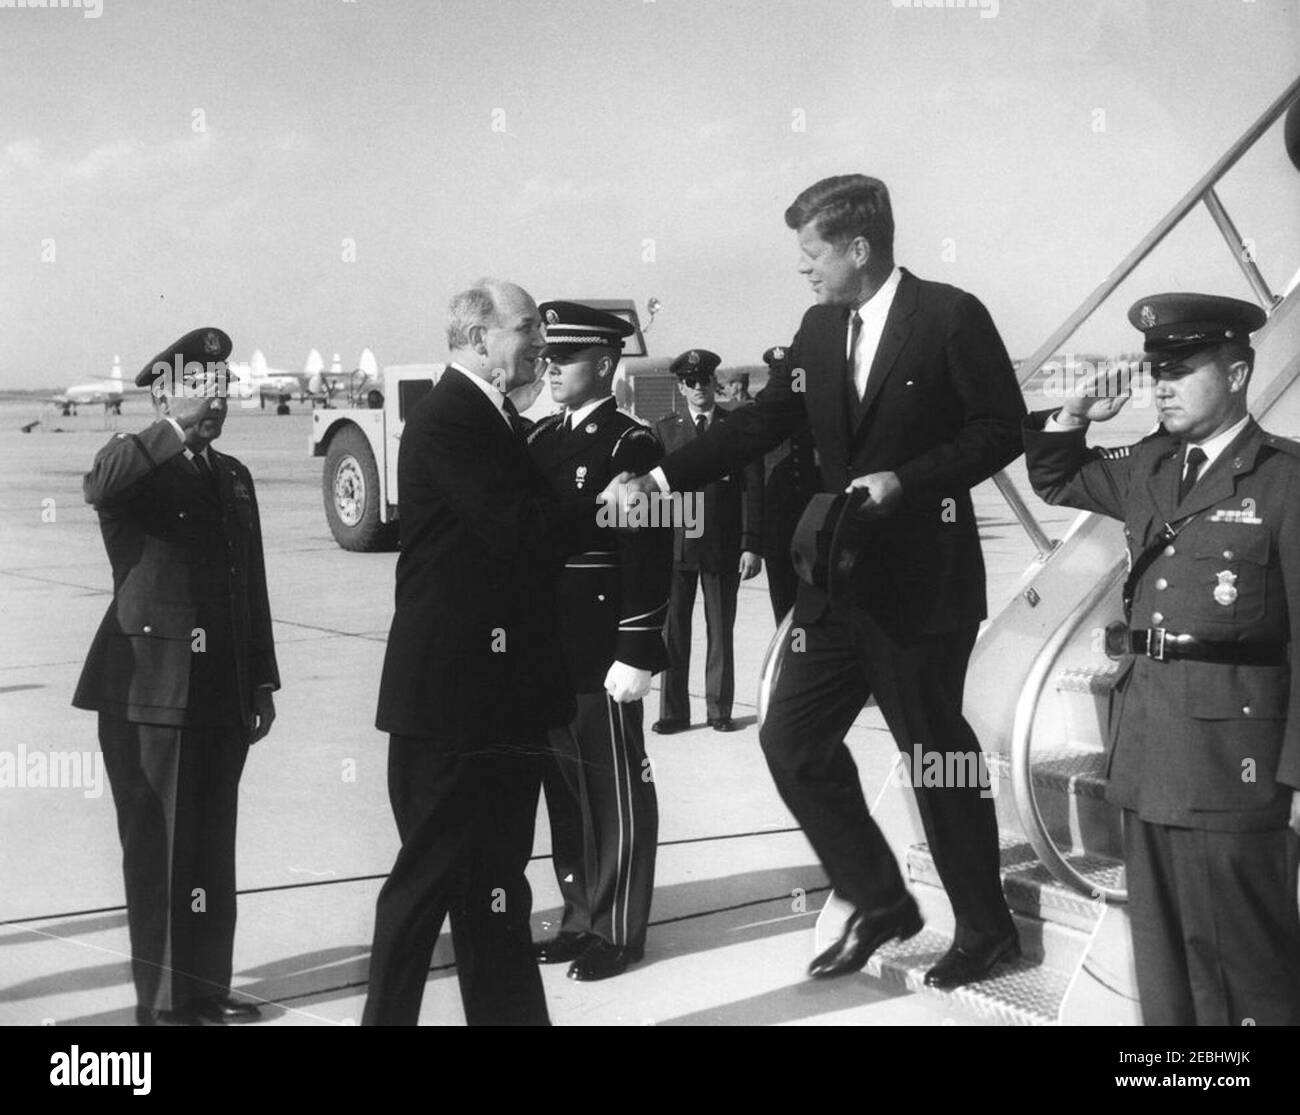 President Kennedy returns to Andrews Air Force Base from Easter vacation, 4:33PM. President John F. Kennedy (holding hat) shakes hands with Secretary of State, Dean Rusk, upon his arrival aboard Air Force One at Andrews Air Force Base, Maryland, following Easter vacation in Palm Beach, Florida. Stock Photo